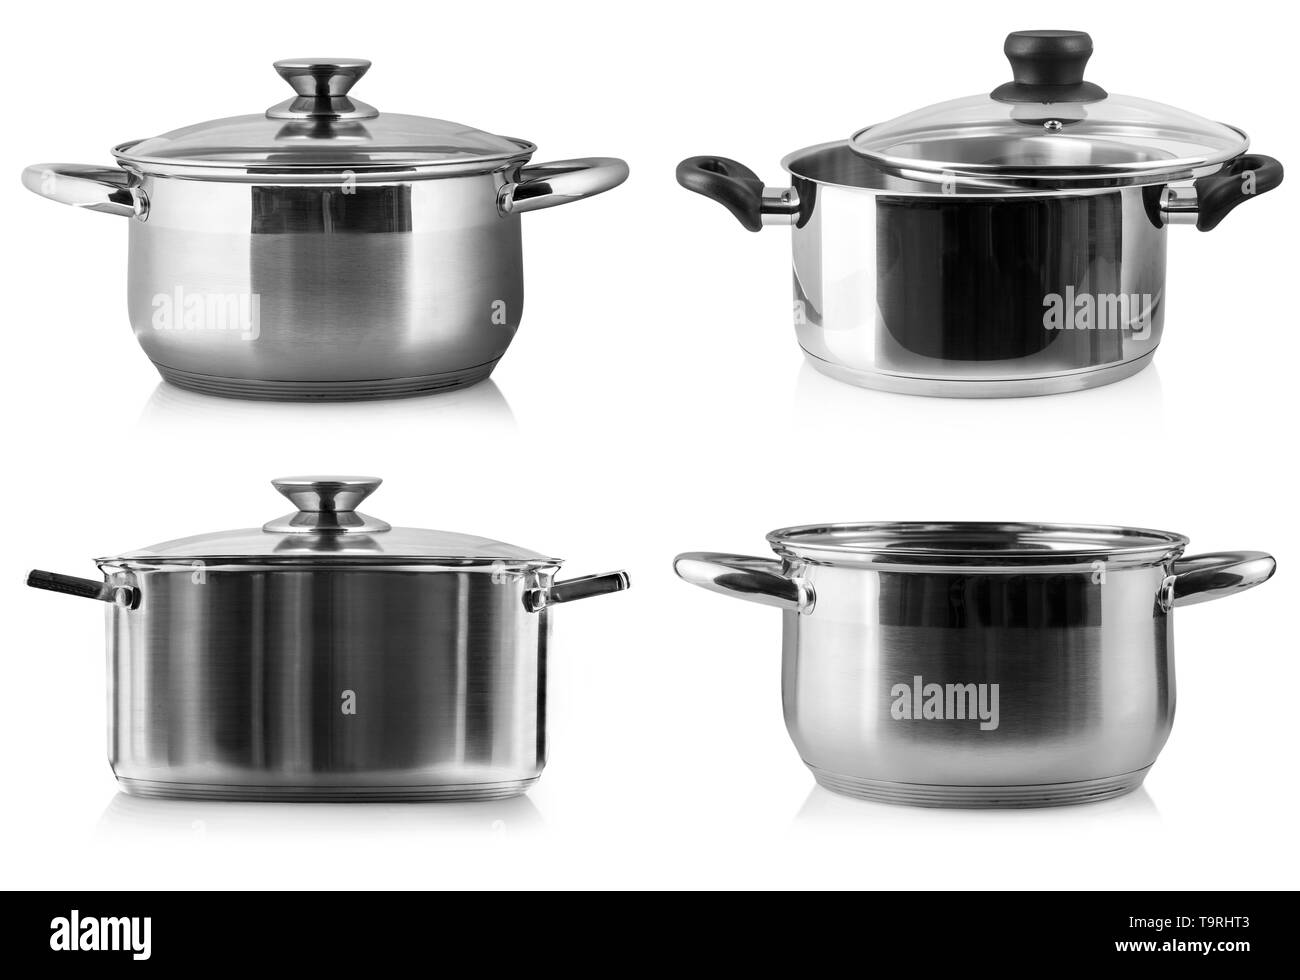 The stainless steel cooking pot over white background with clipping path Stock Photo